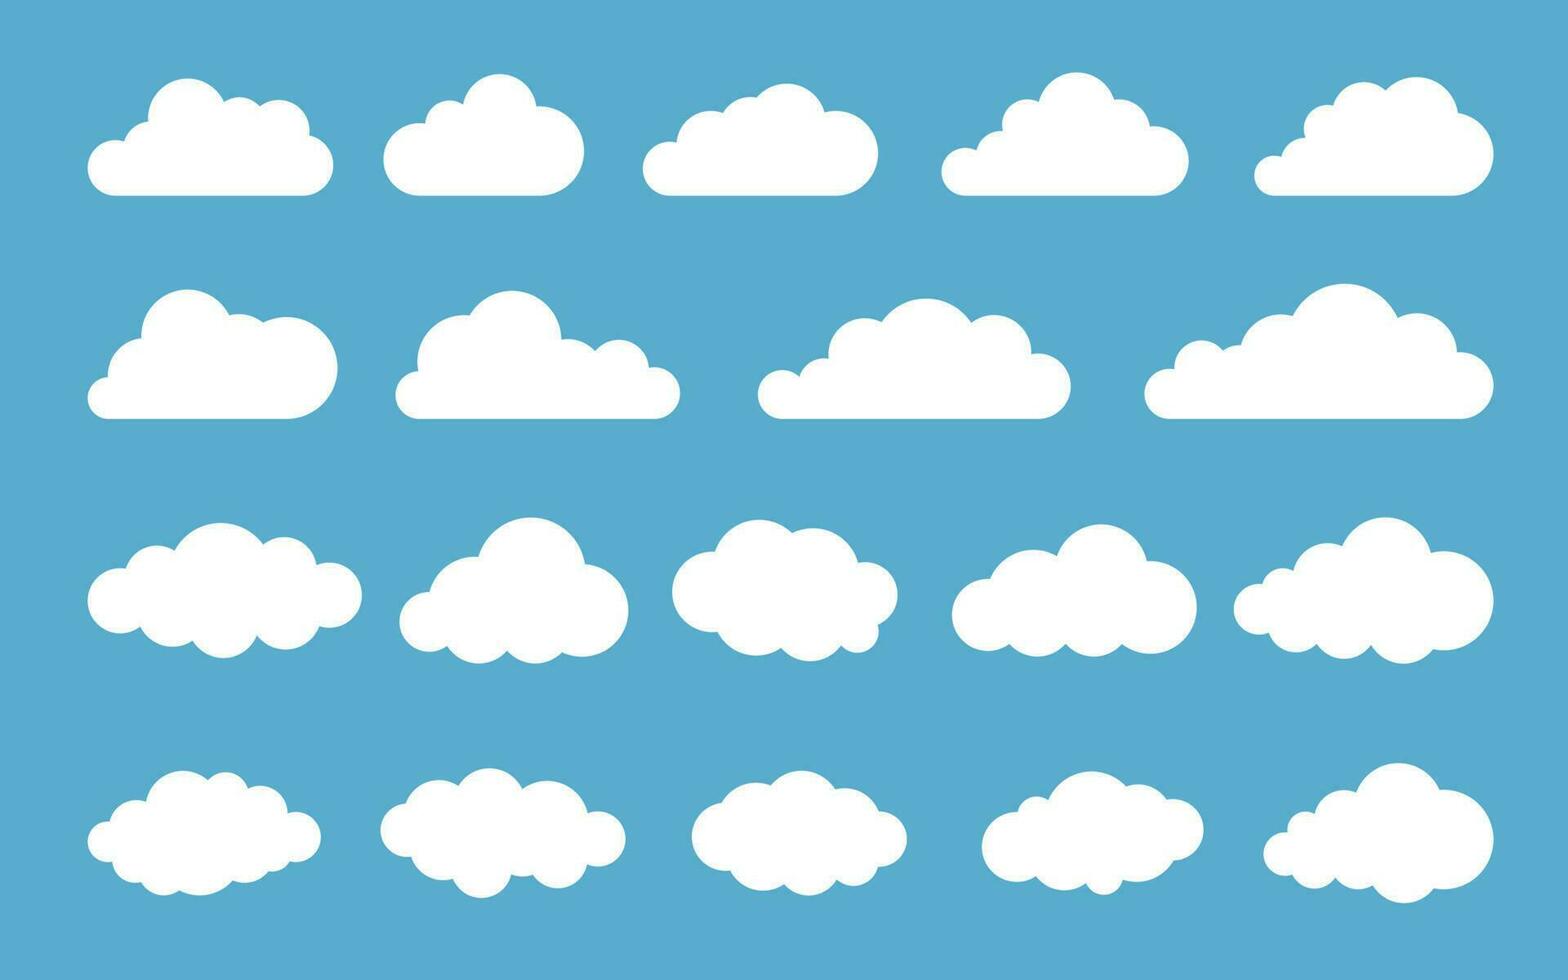 Cloud. Abstract white cloudy set isolated on blue background. Vector illustration